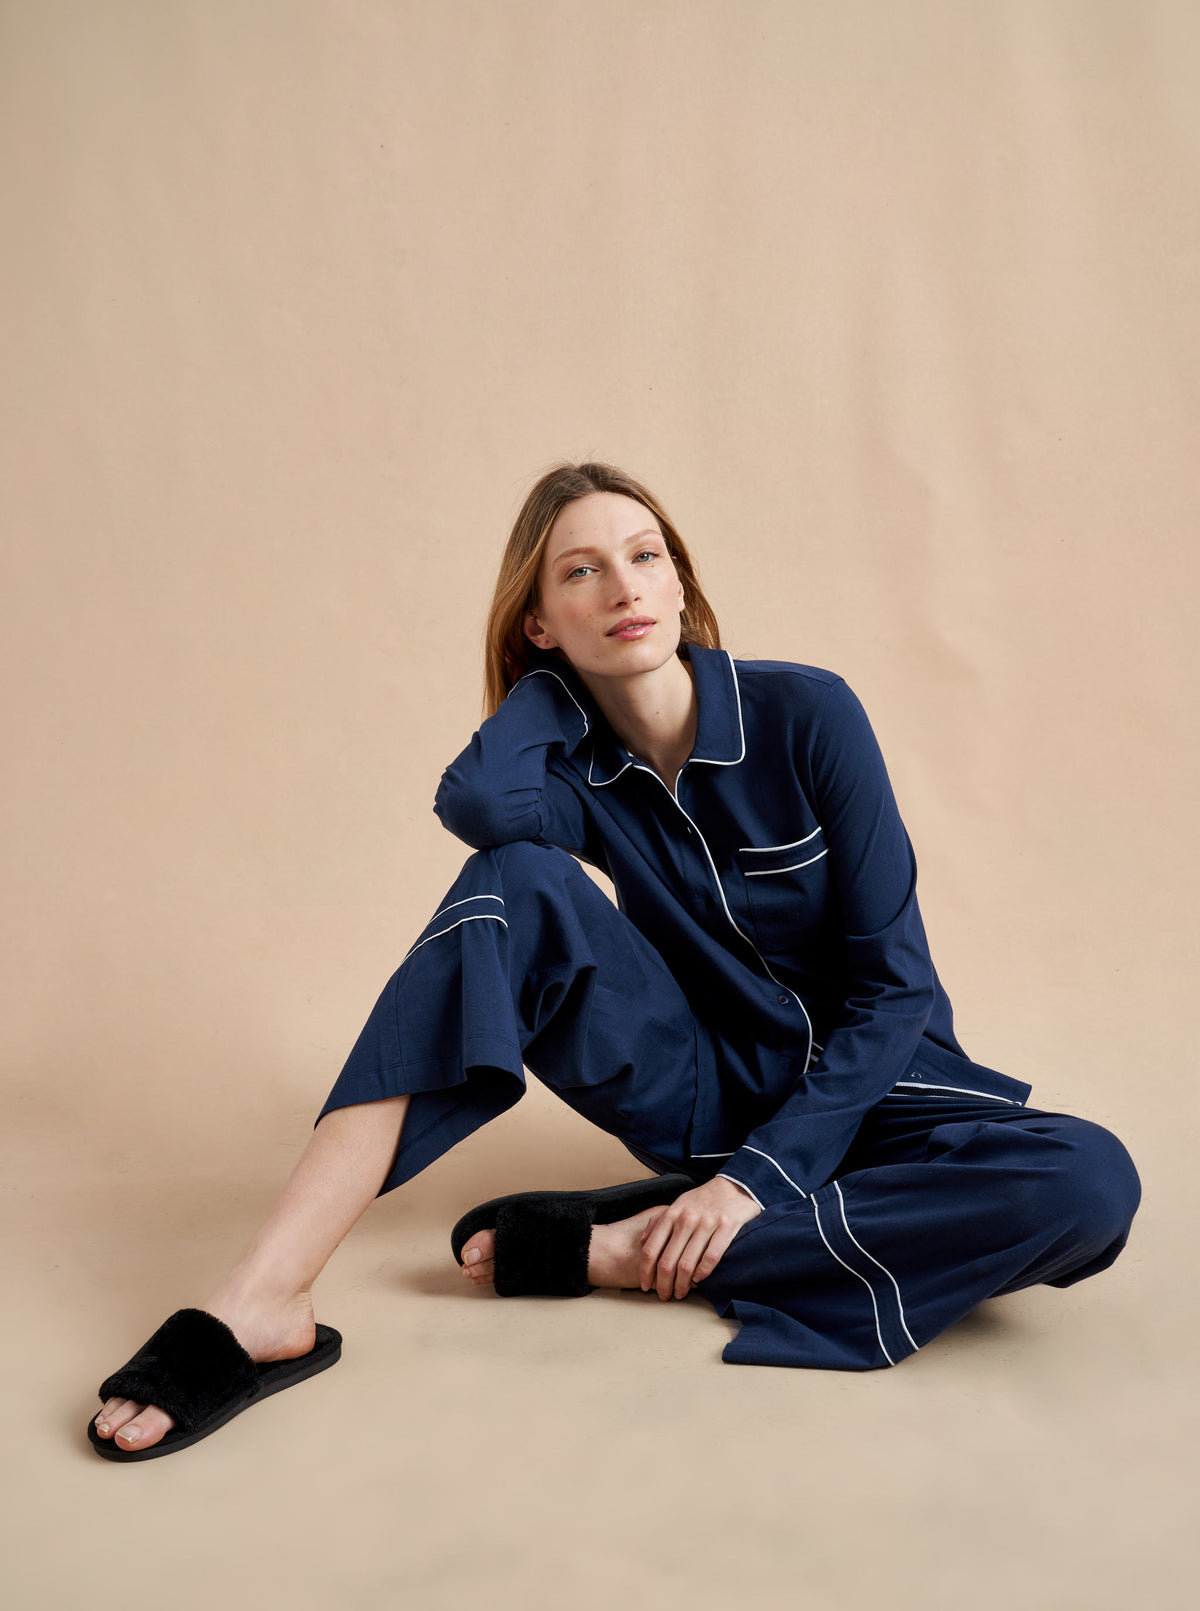 Pajama party ready. Our PJs are cut from our super soft t-shirt fabric for the ultimate in comfort and style when you need a little hygge. Navy cotton framed with contrasting white piping, our PJ set has a relaxed-fit top and elasticated drawstring wide-leg pants.